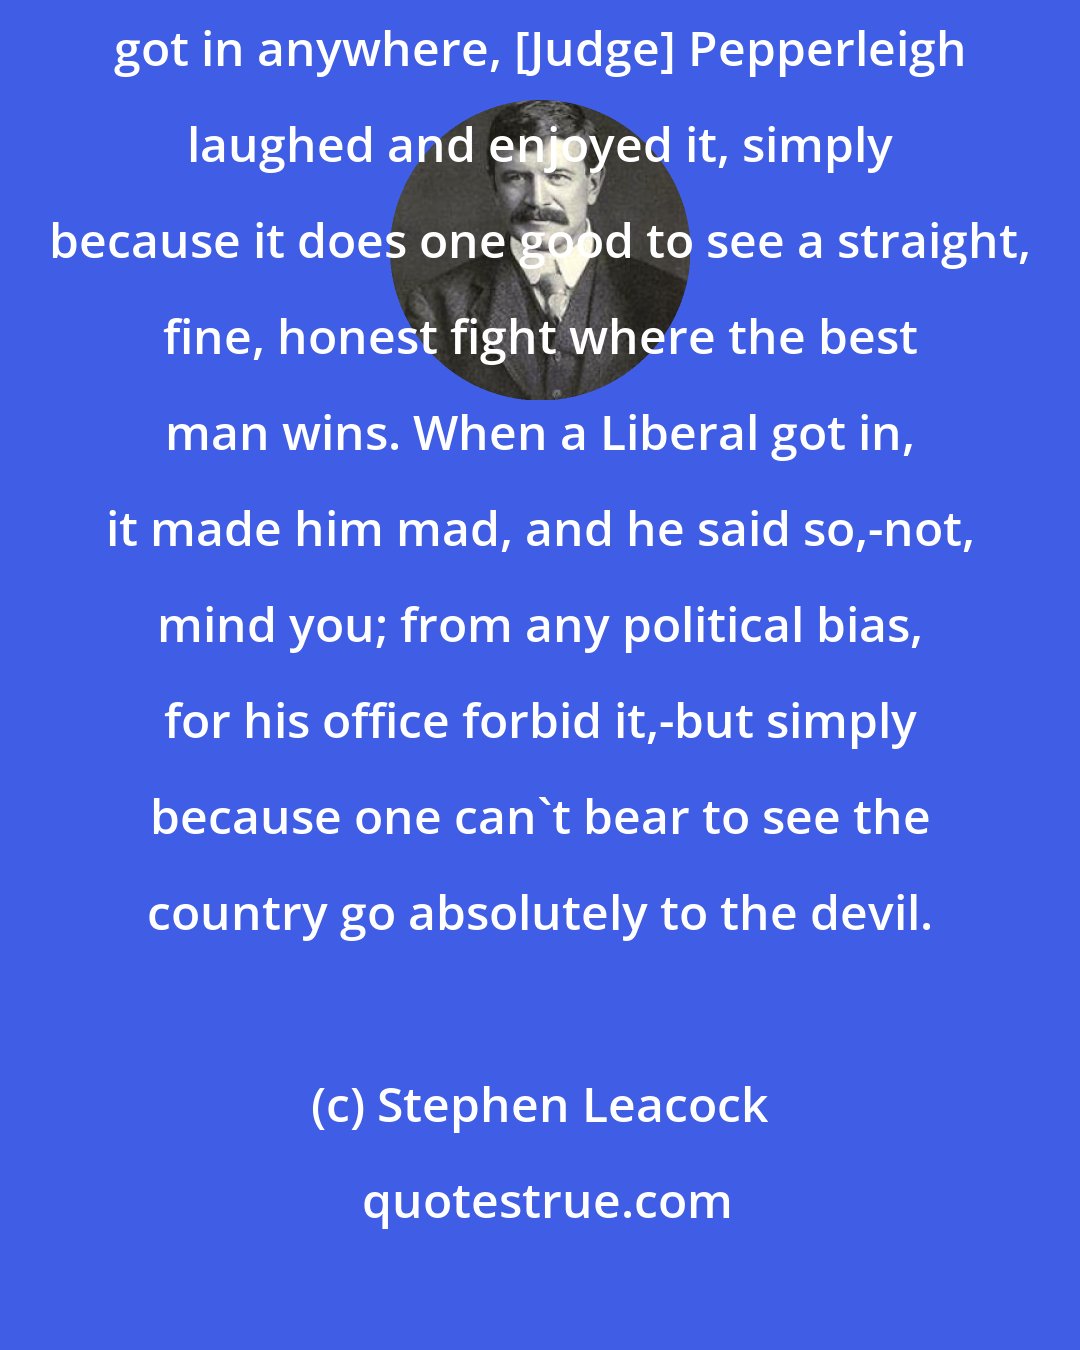 Stephen Leacock: As for politics, well, it all seemed reasonable enough. When the Conservatives got in anywhere, [Judge] Pepperleigh laughed and enjoyed it, simply because it does one good to see a straight, fine, honest fight where the best man wins. When a Liberal got in, it made him mad, and he said so,-not, mind you; from any political bias, for his office forbid it,-but simply because one can't bear to see the country go absolutely to the devil.